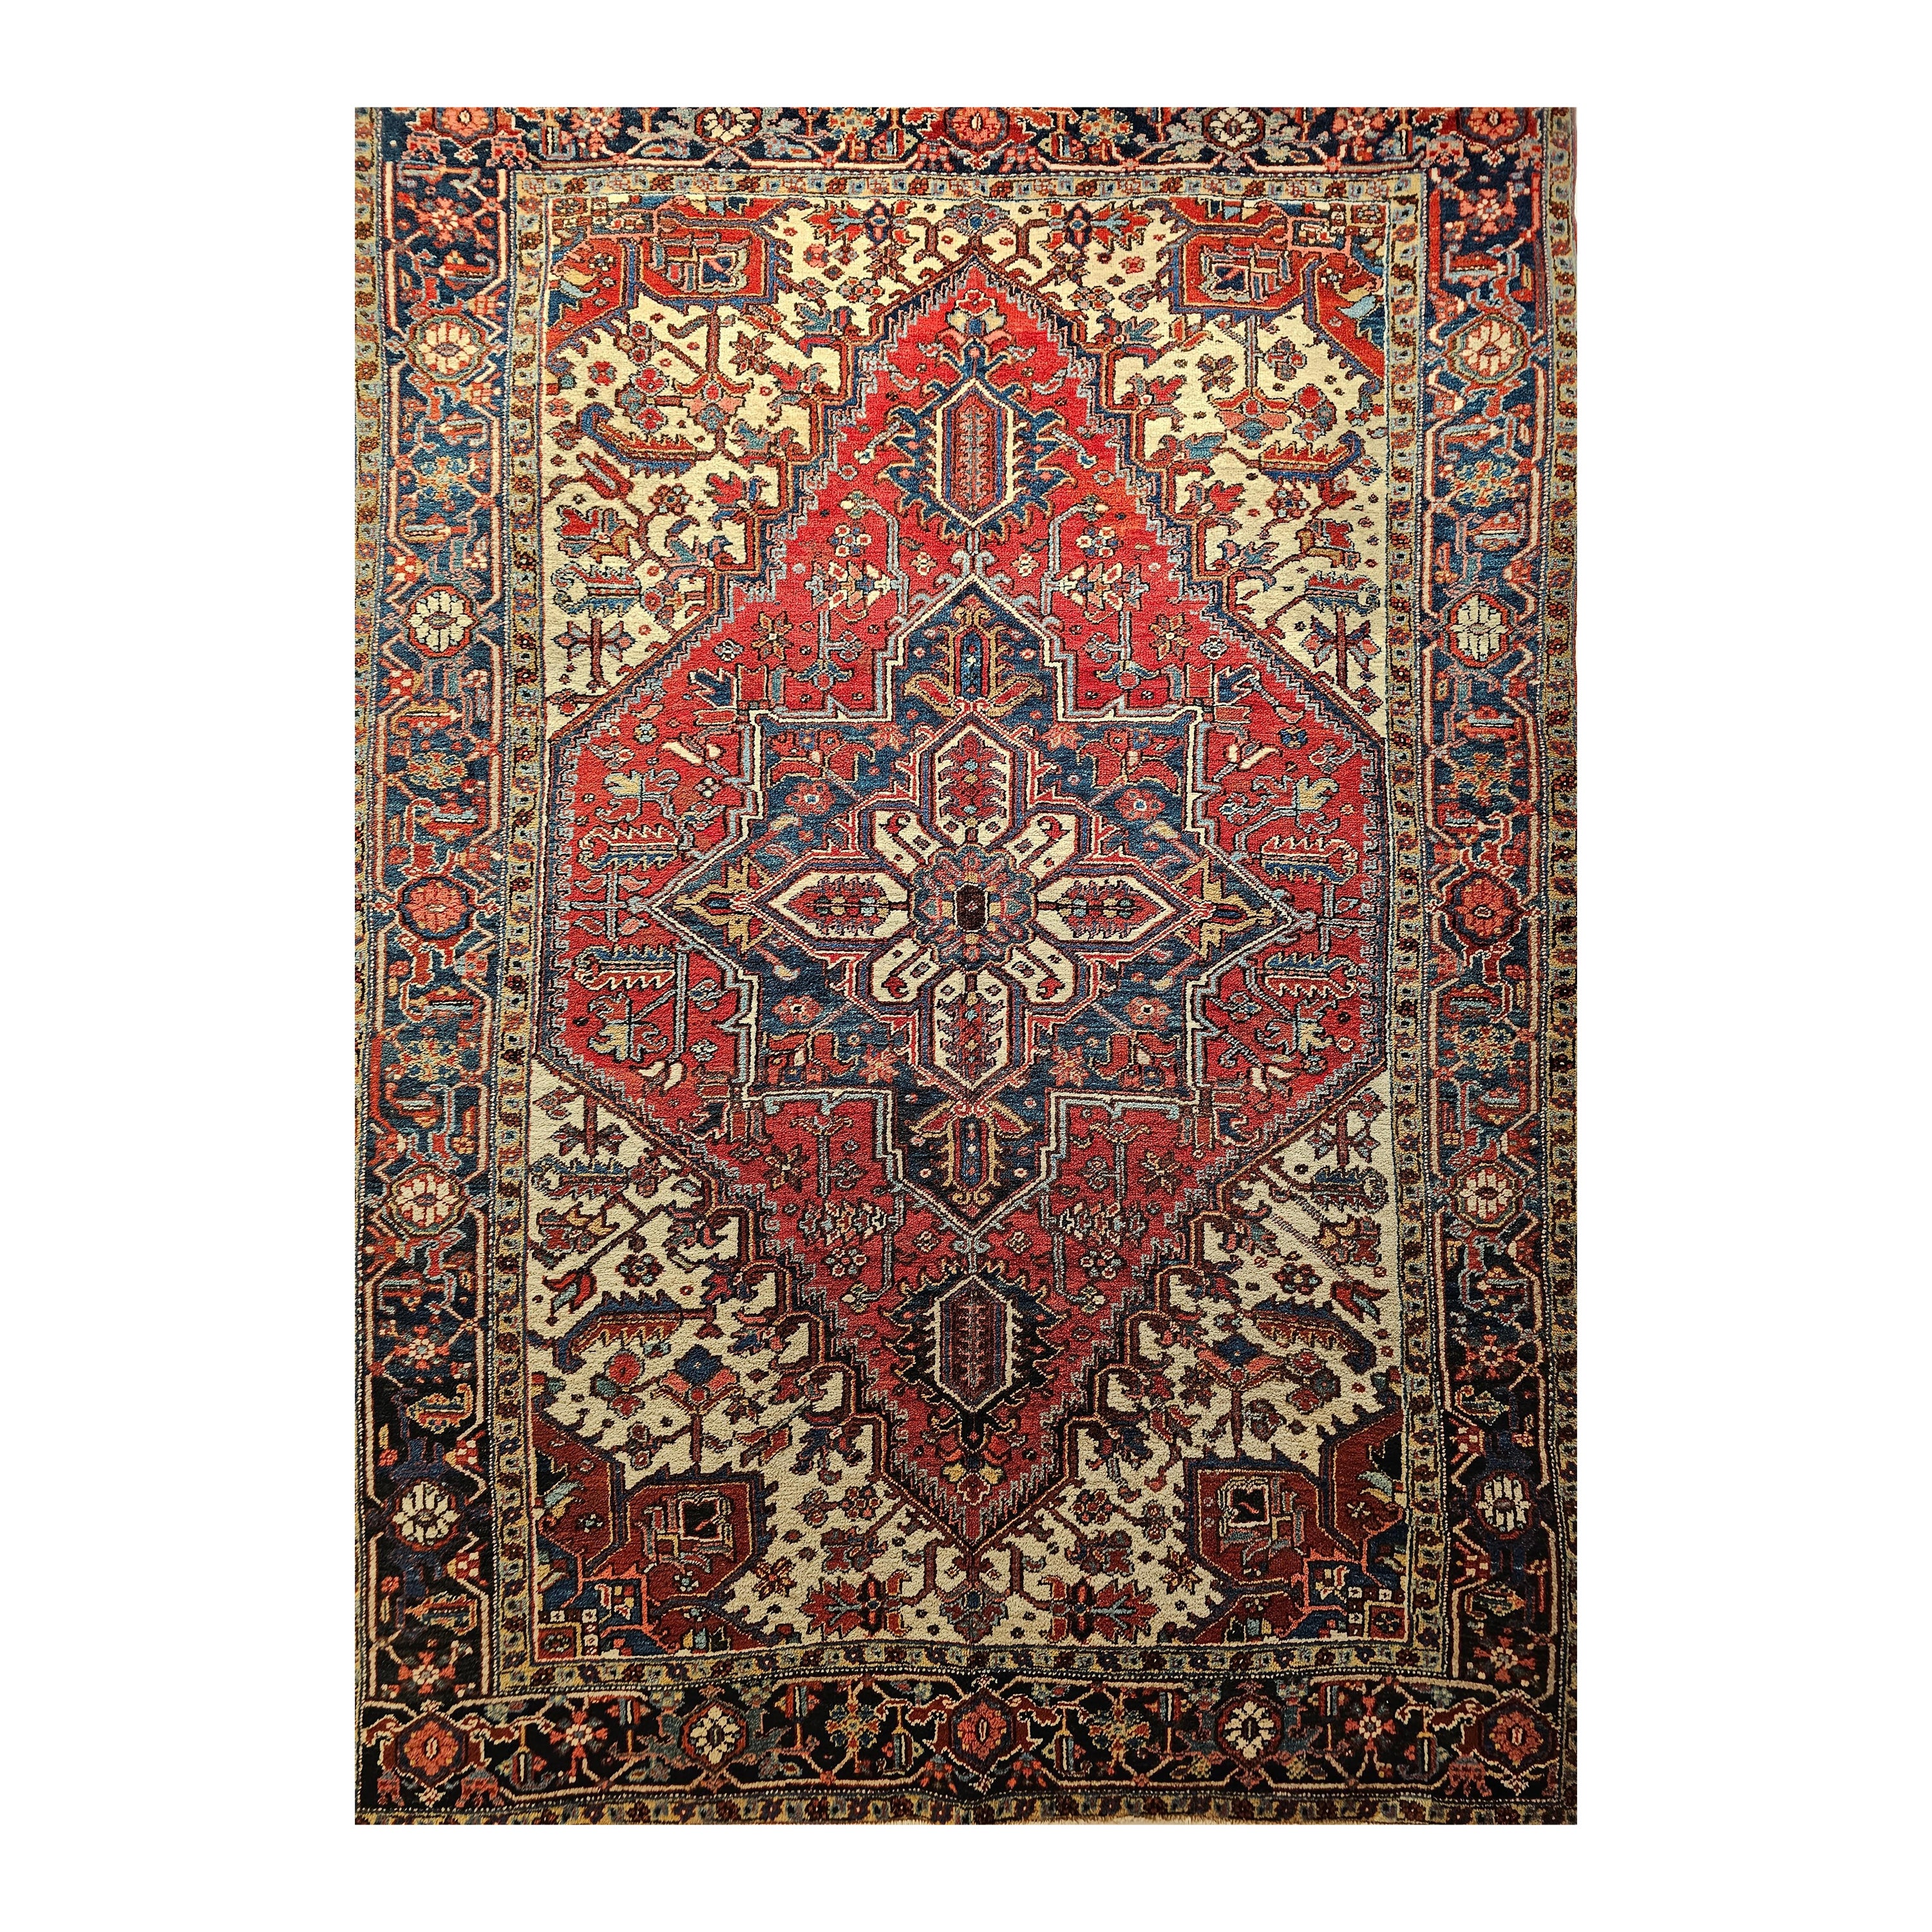 Early 20th Century Persian Heriz in Red, Navy, French Blue, Ivory, Pink, Yellow